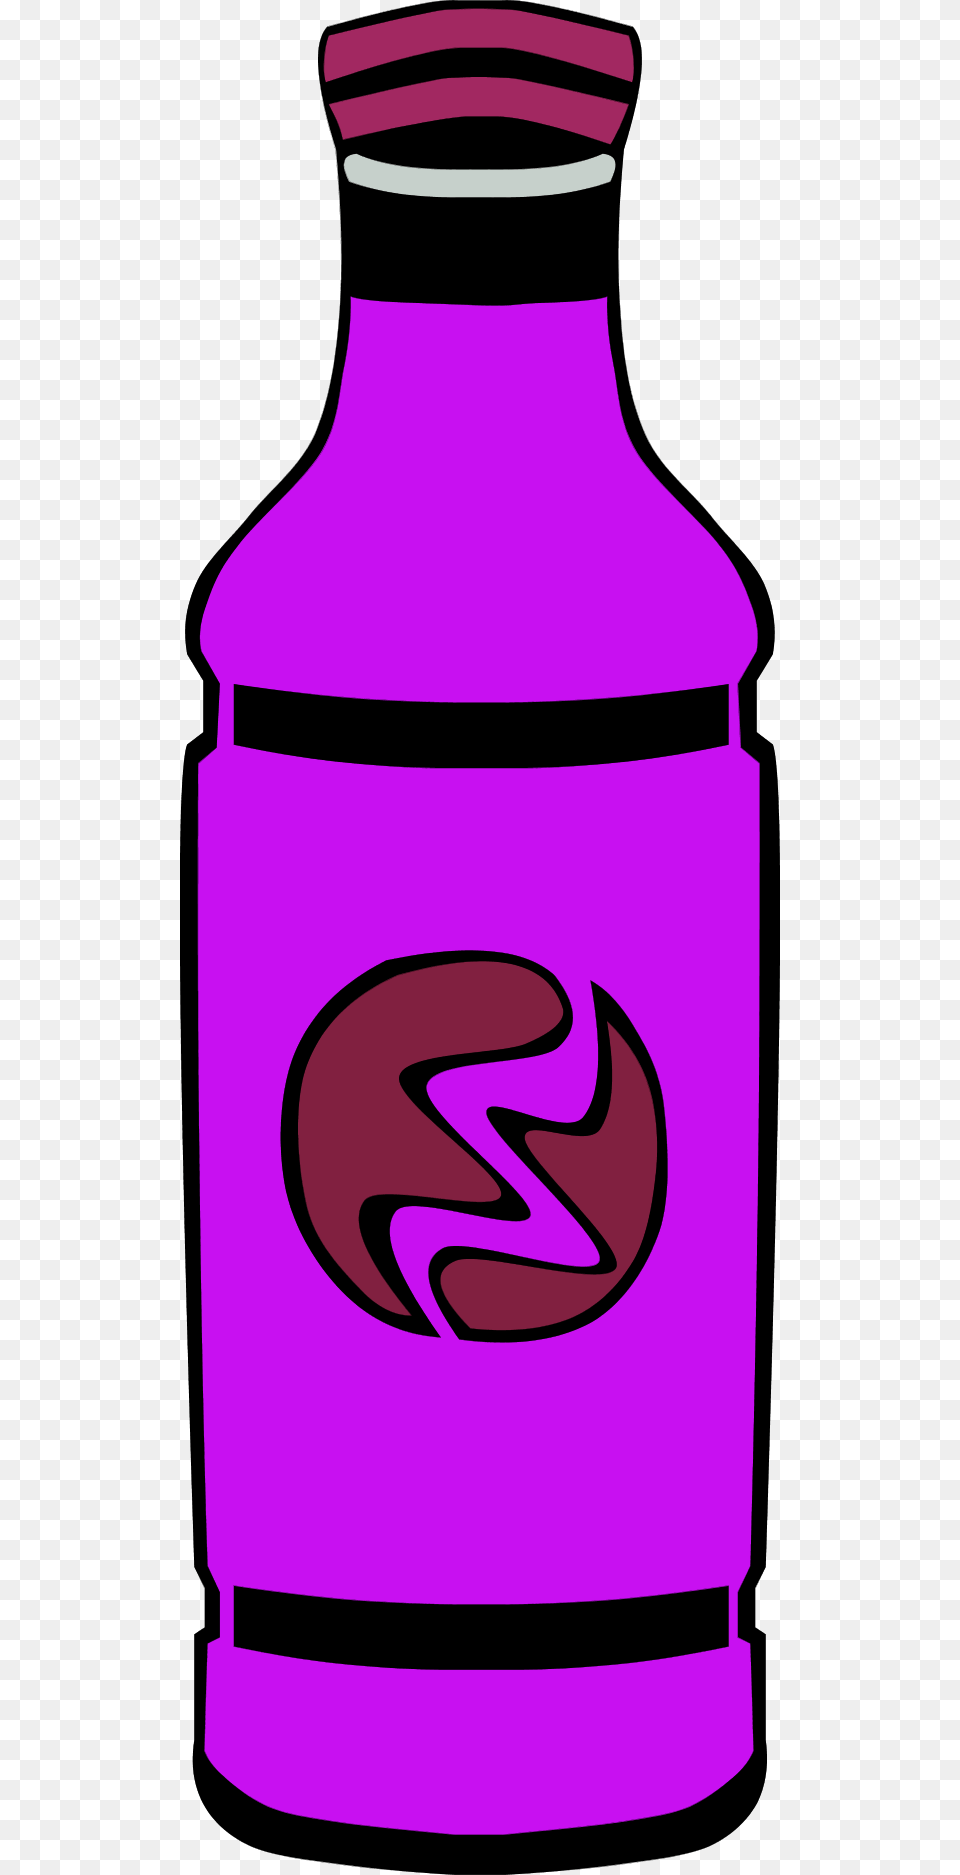 Bottle Clipart Juice Bottle Juice Bottle Clipart, Beverage, Soda, Person Free Png